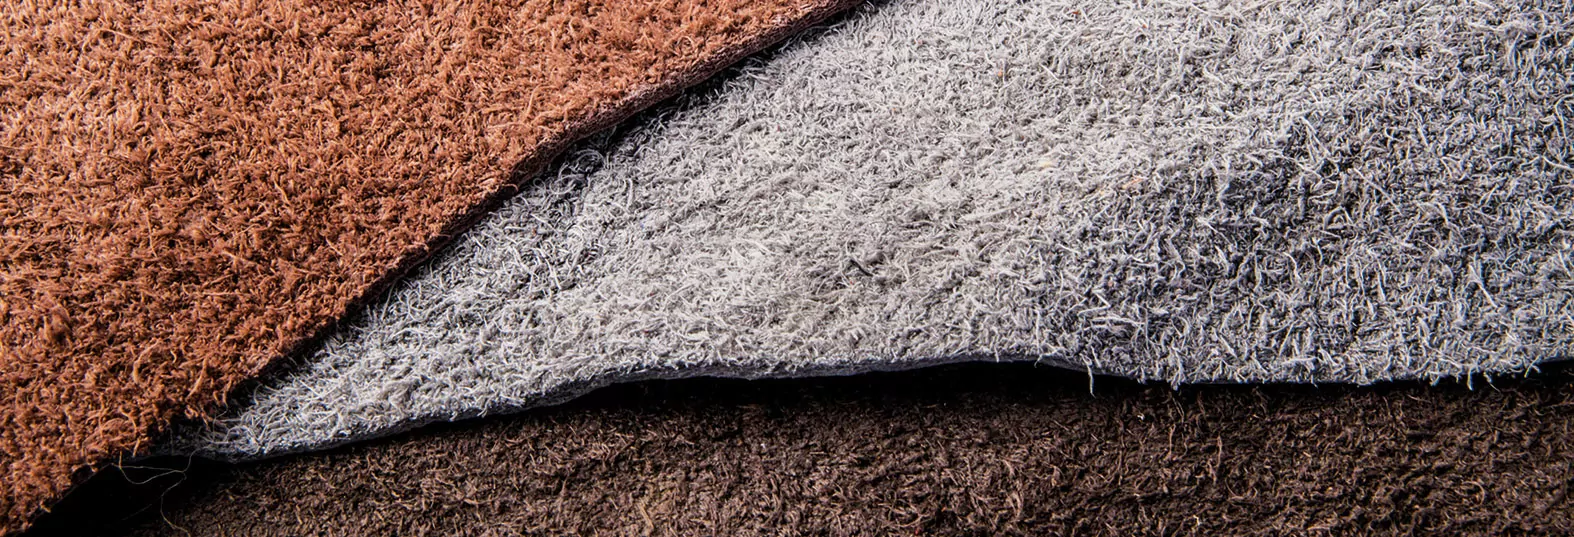 Leather tanning – the most important process involved in leather production